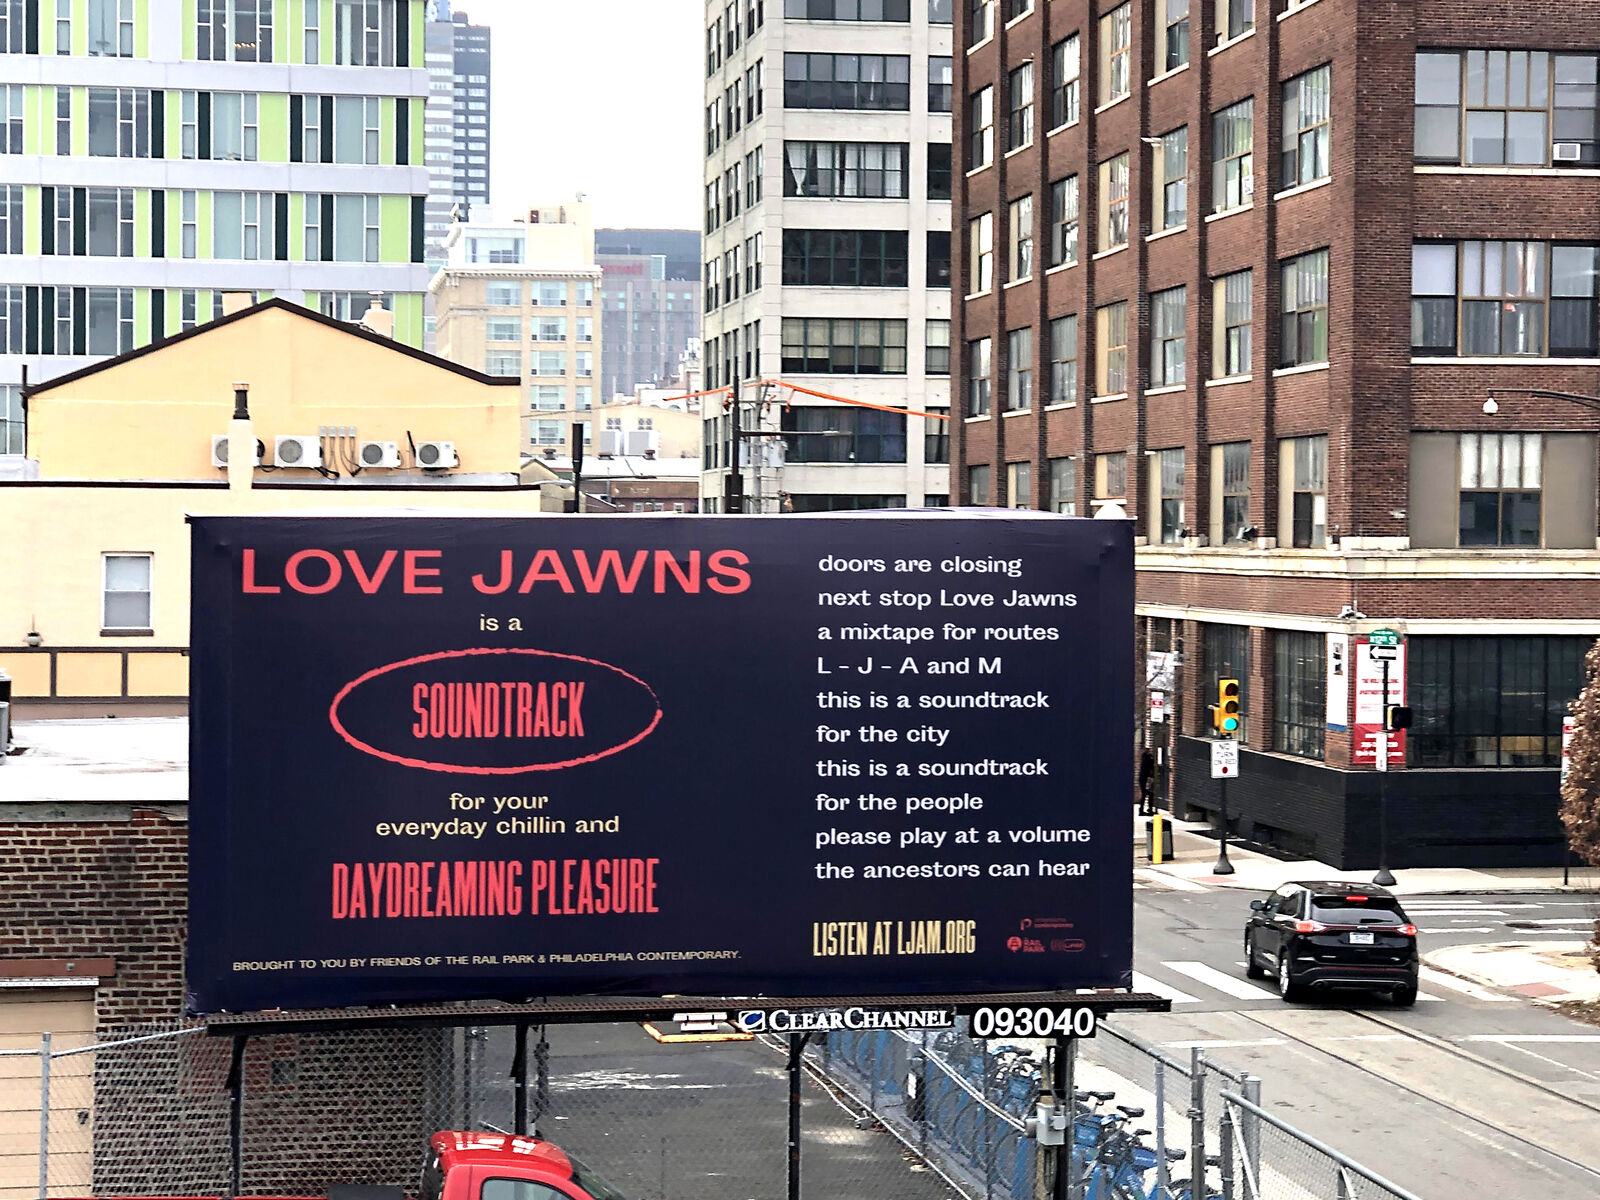 Billboard that says "love jawns is a soundtrack for everyday chillin and daydreaming pleasure" with a poem verse beside it